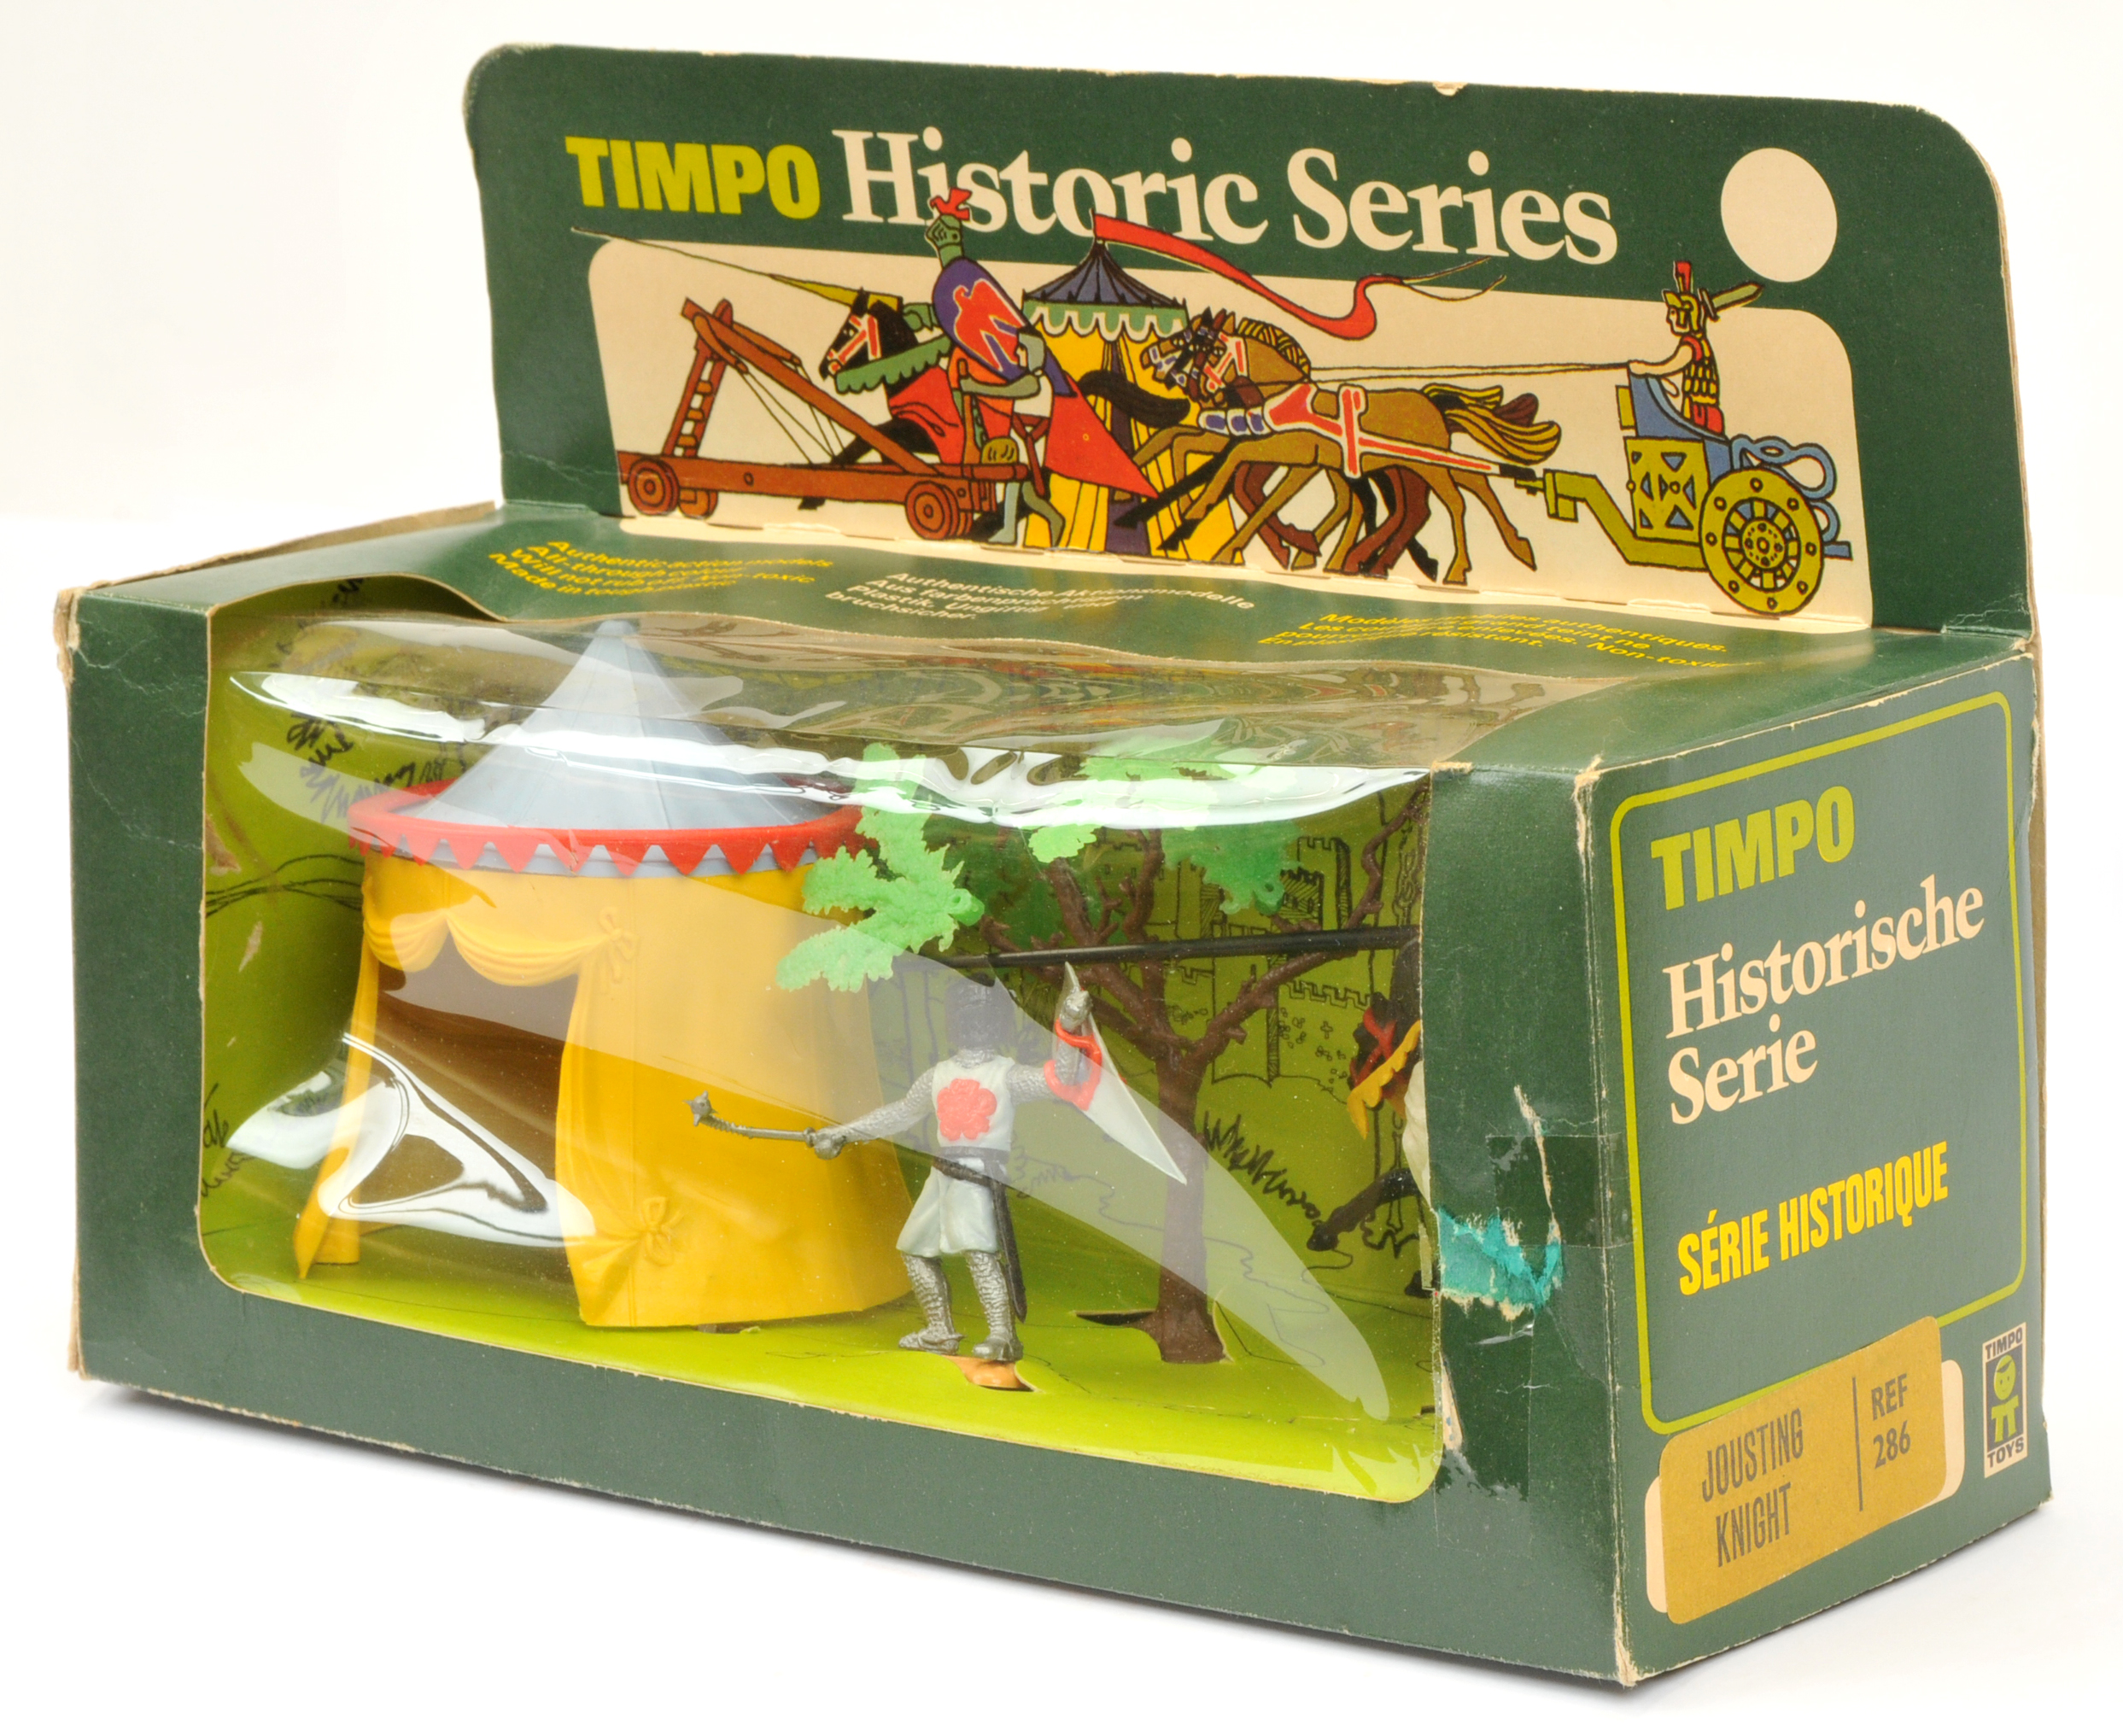 Timpo Historic Series - Set Ref. No. 286 'Jousting Knight', Boxed - Image 2 of 2